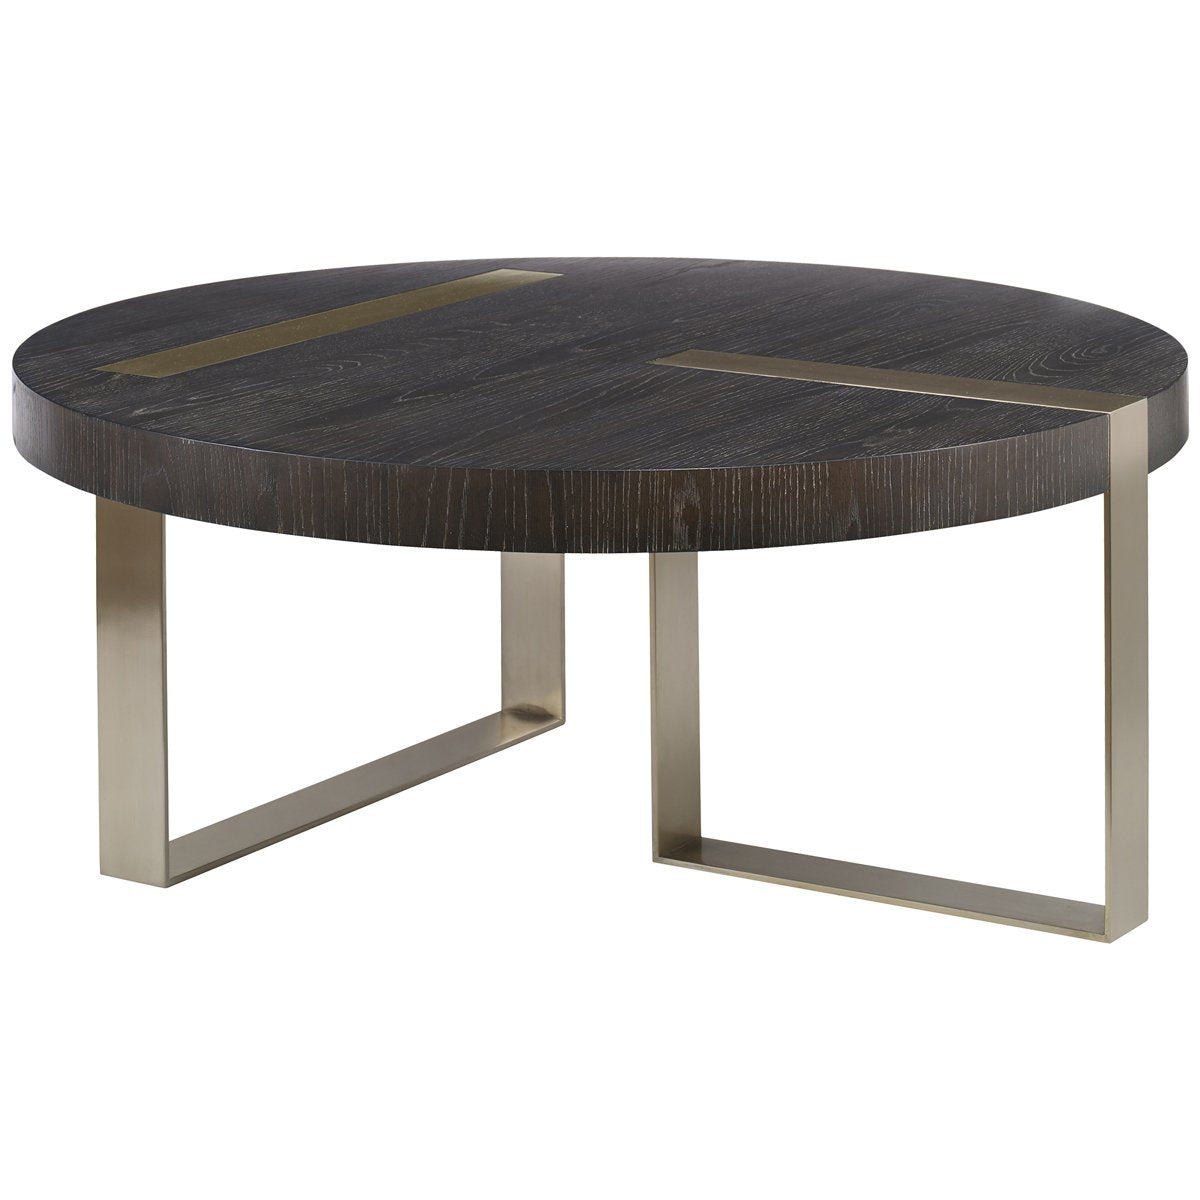 Uttermost Converge Round Coffee Table